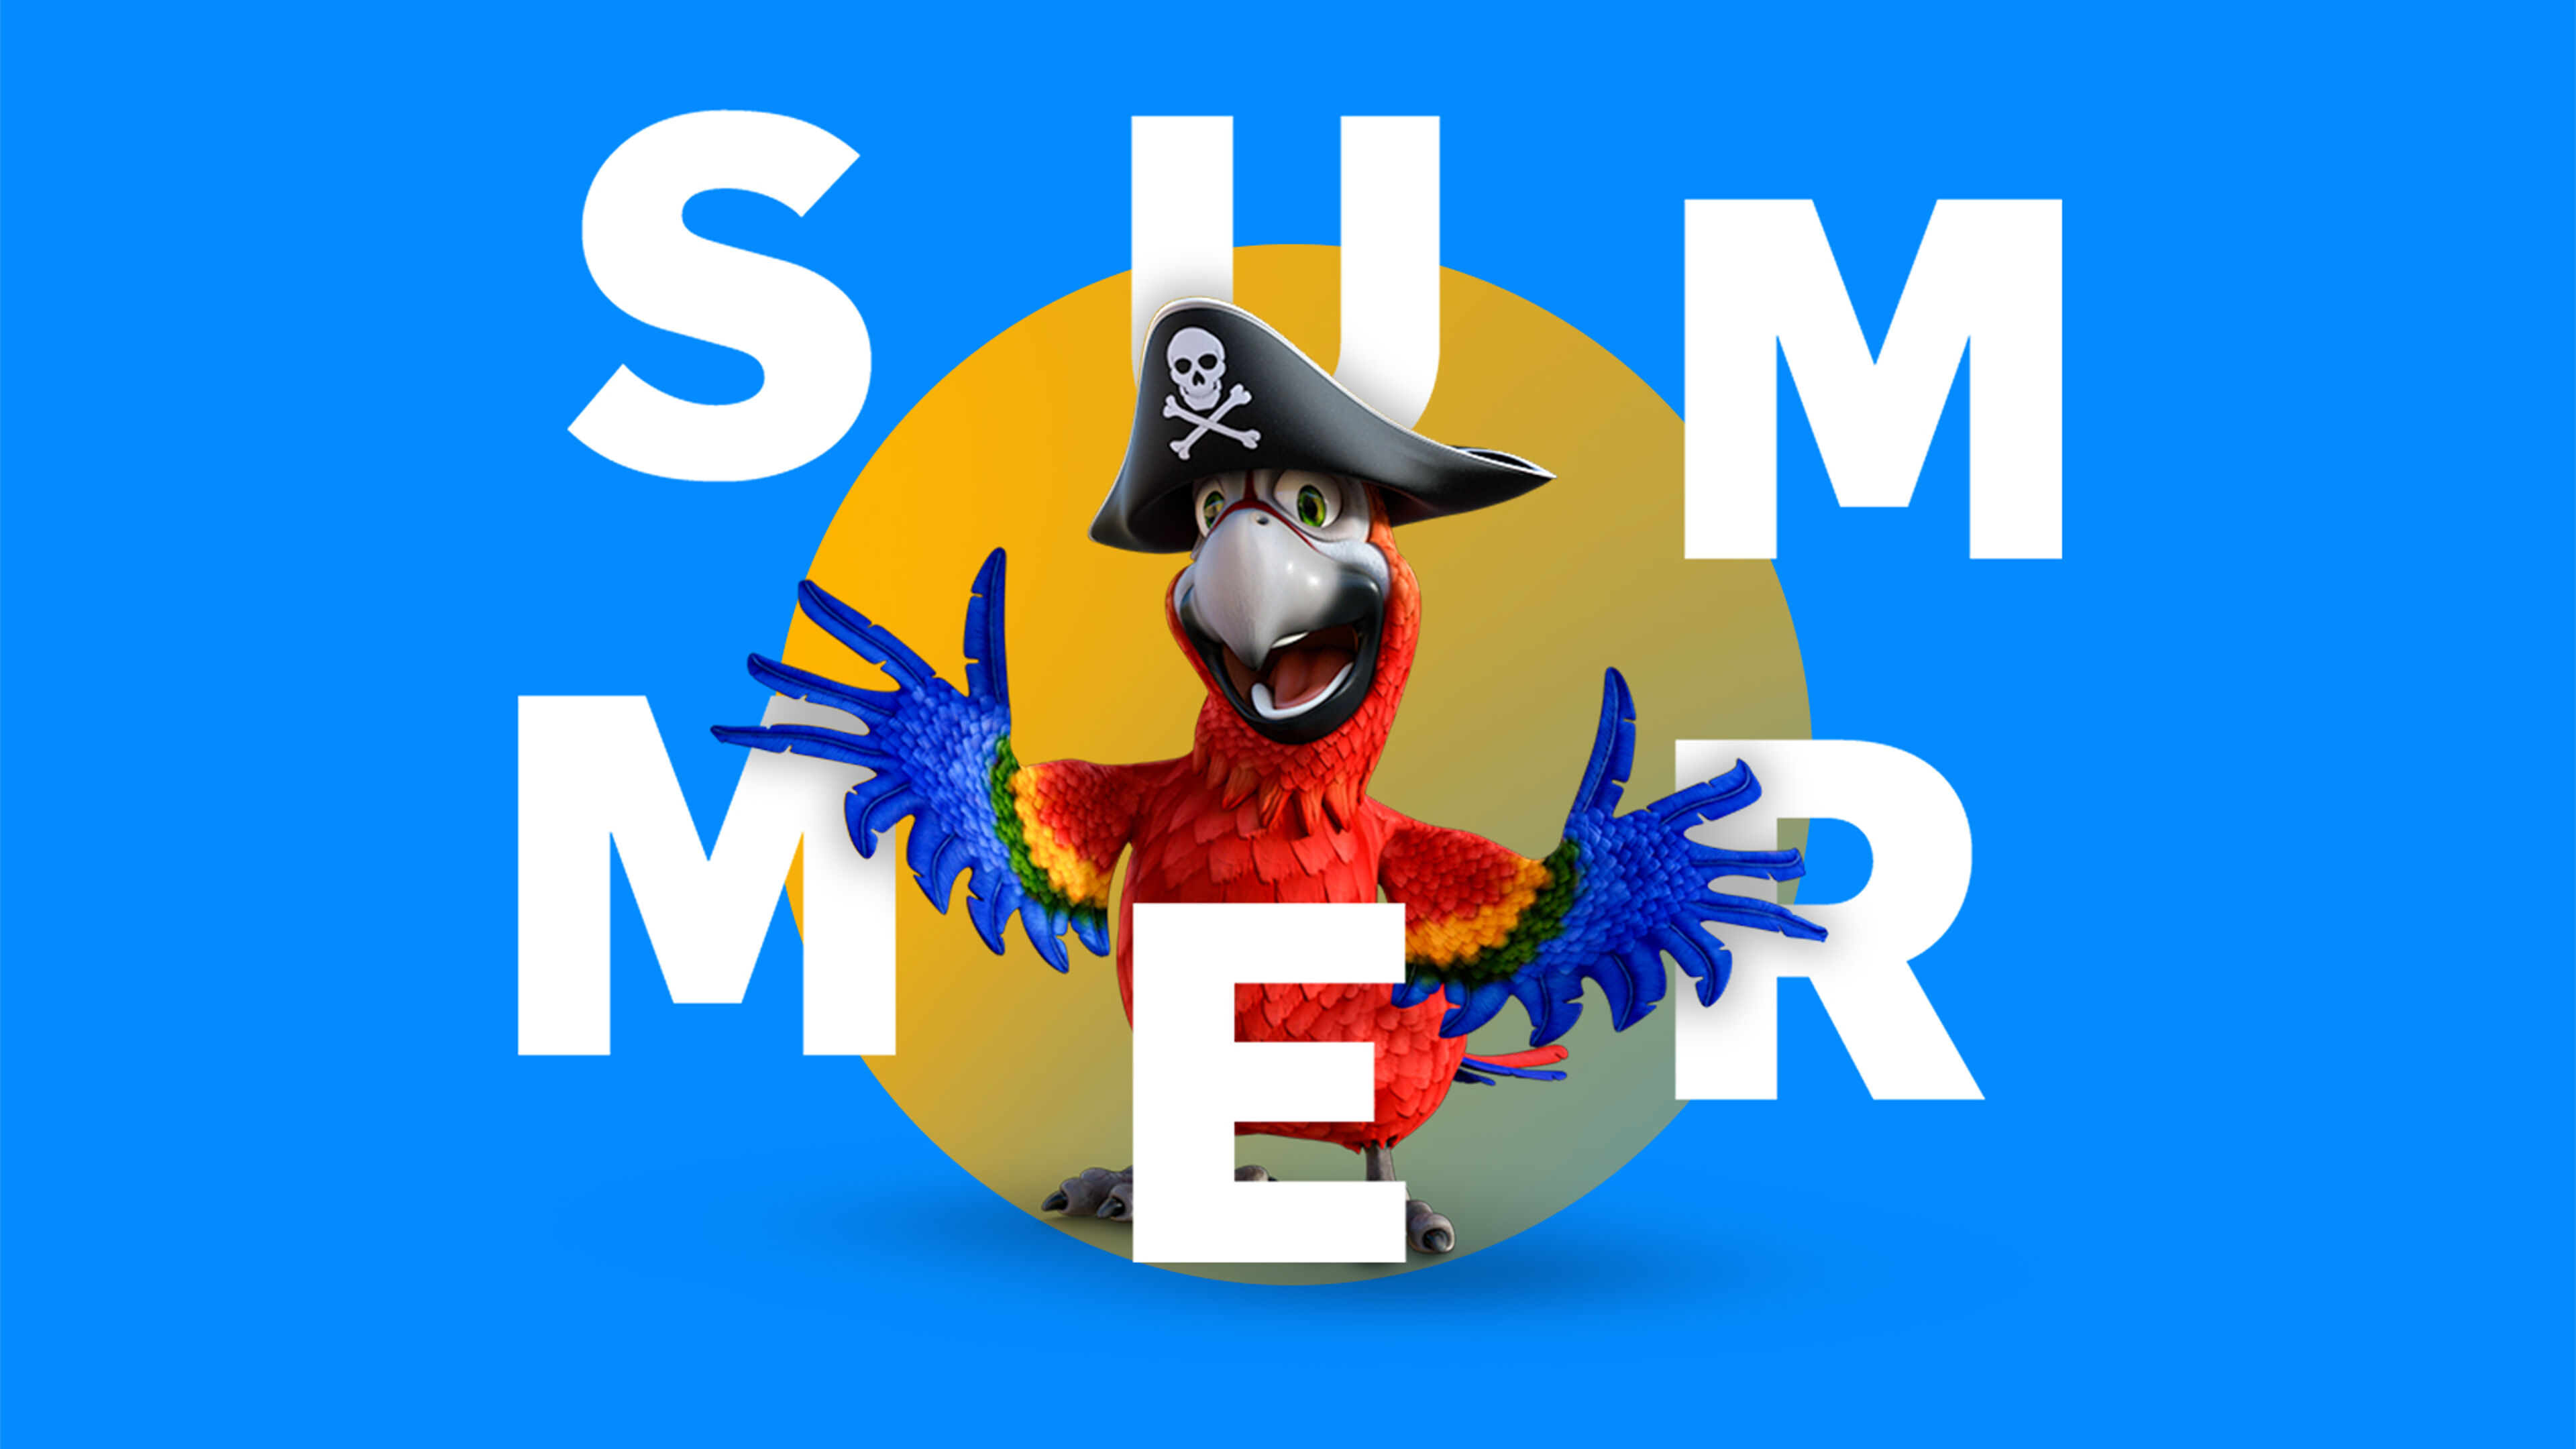 A playful graphic featuring 'SUMMER' text and a cartoon parrot in pirate attire against a blue background.